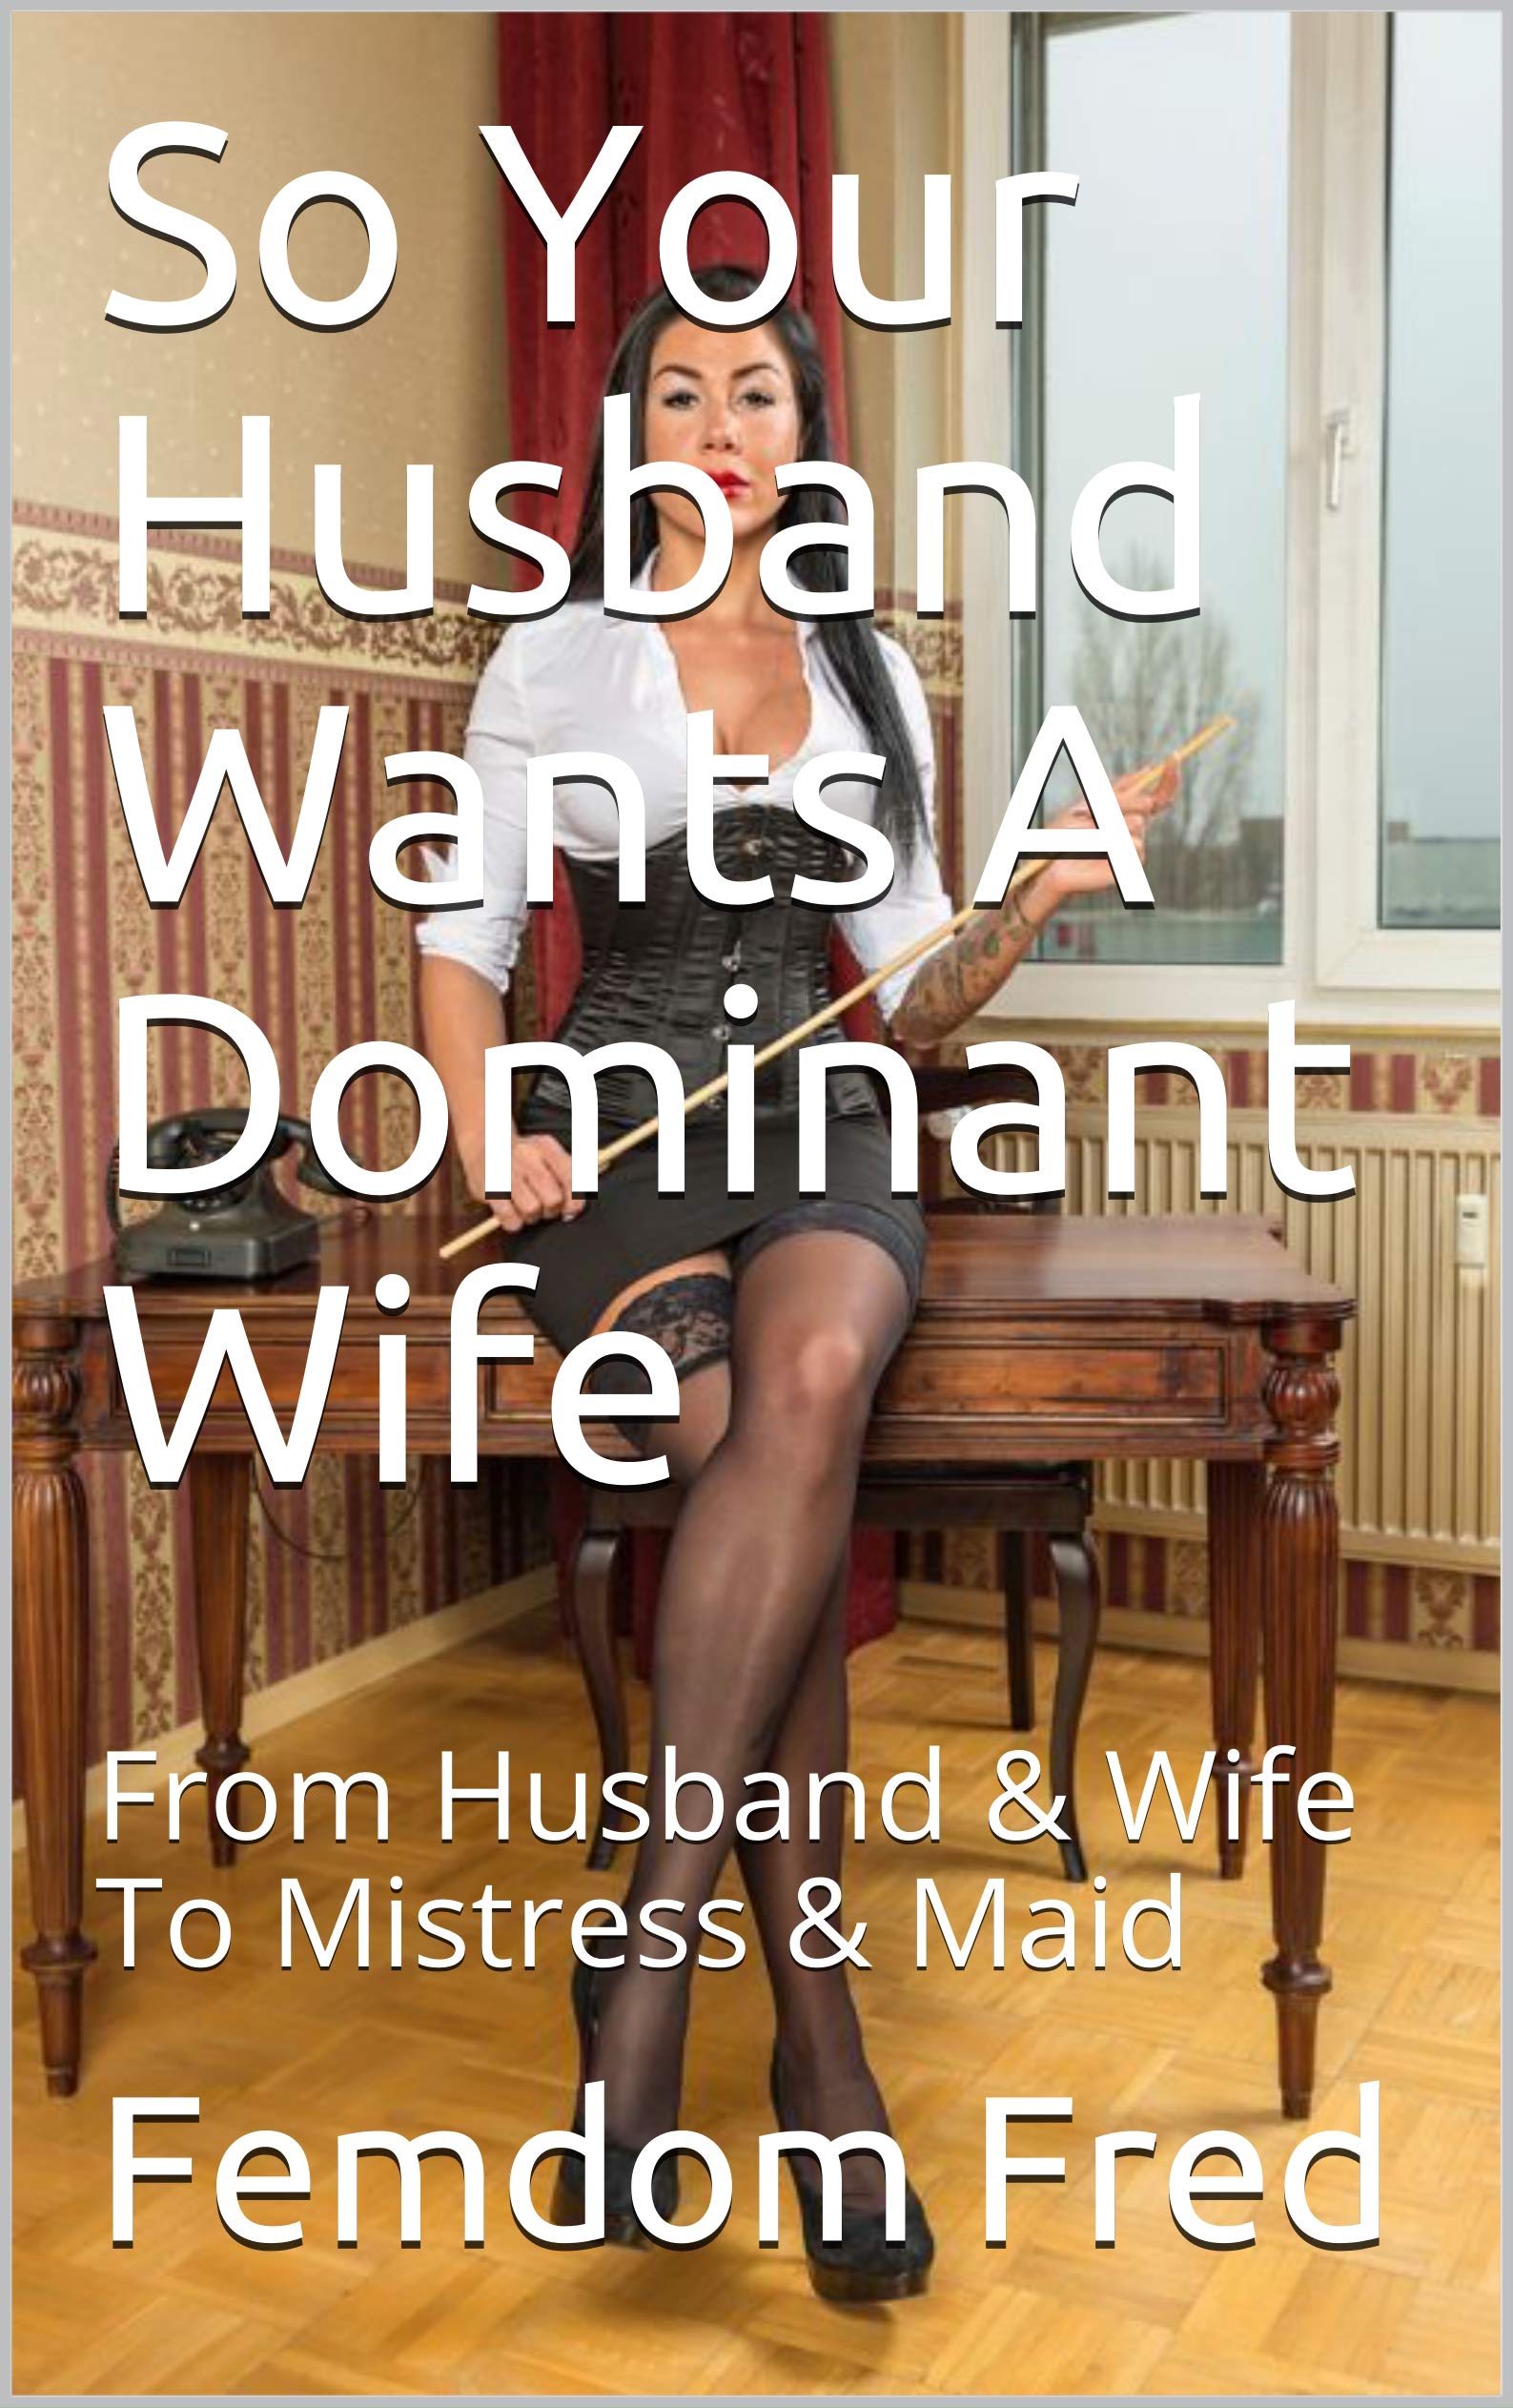 chad hunter recommends Dominant Wife Sissy Husband